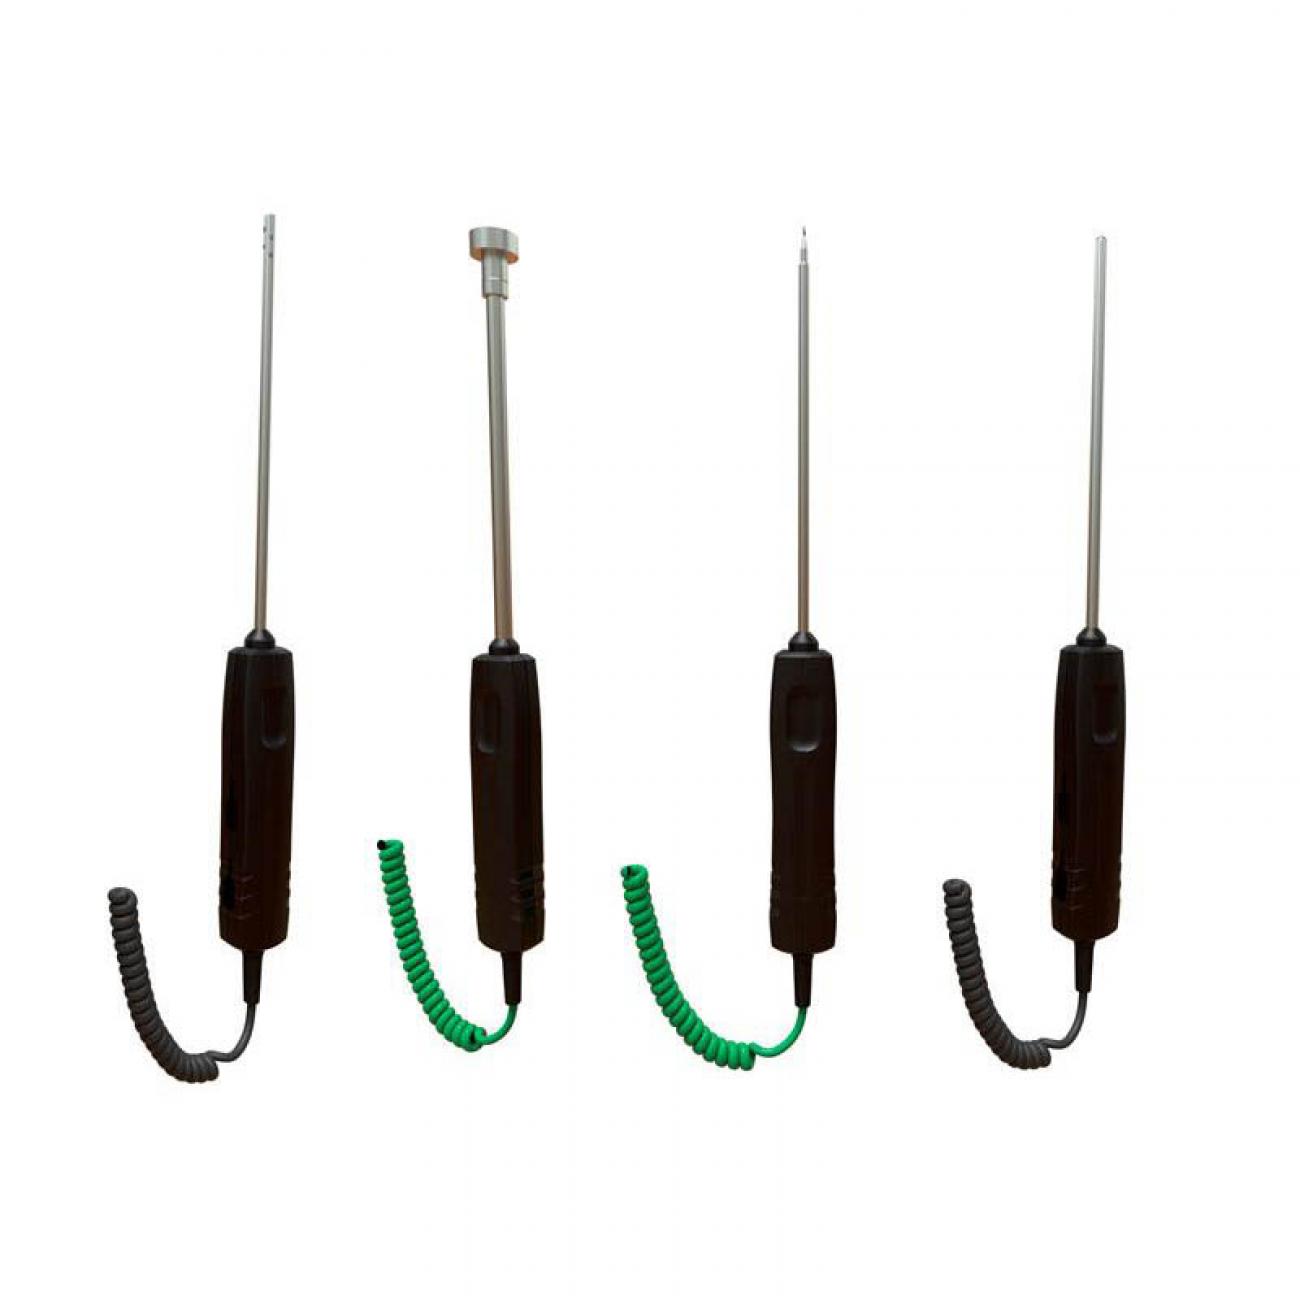 Thermocouple and Pt100 temperature probes